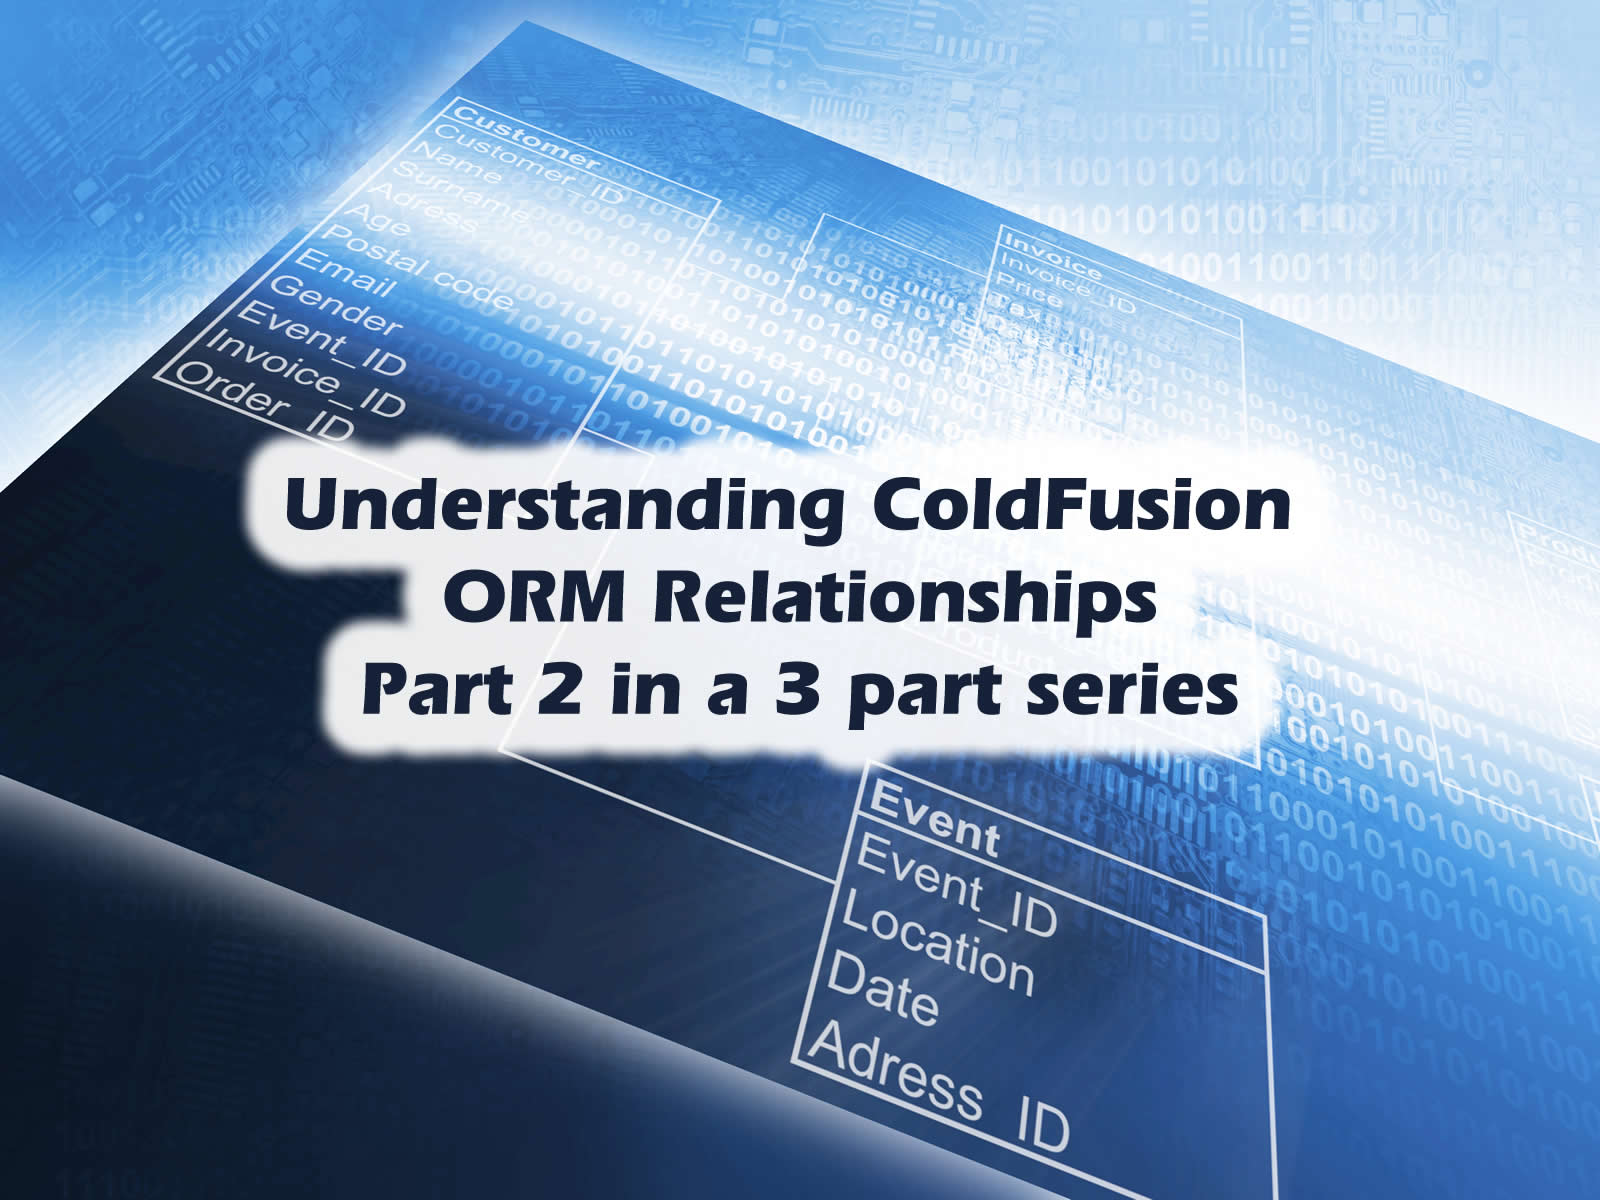 Understanding ColdFusion ORM Relationships